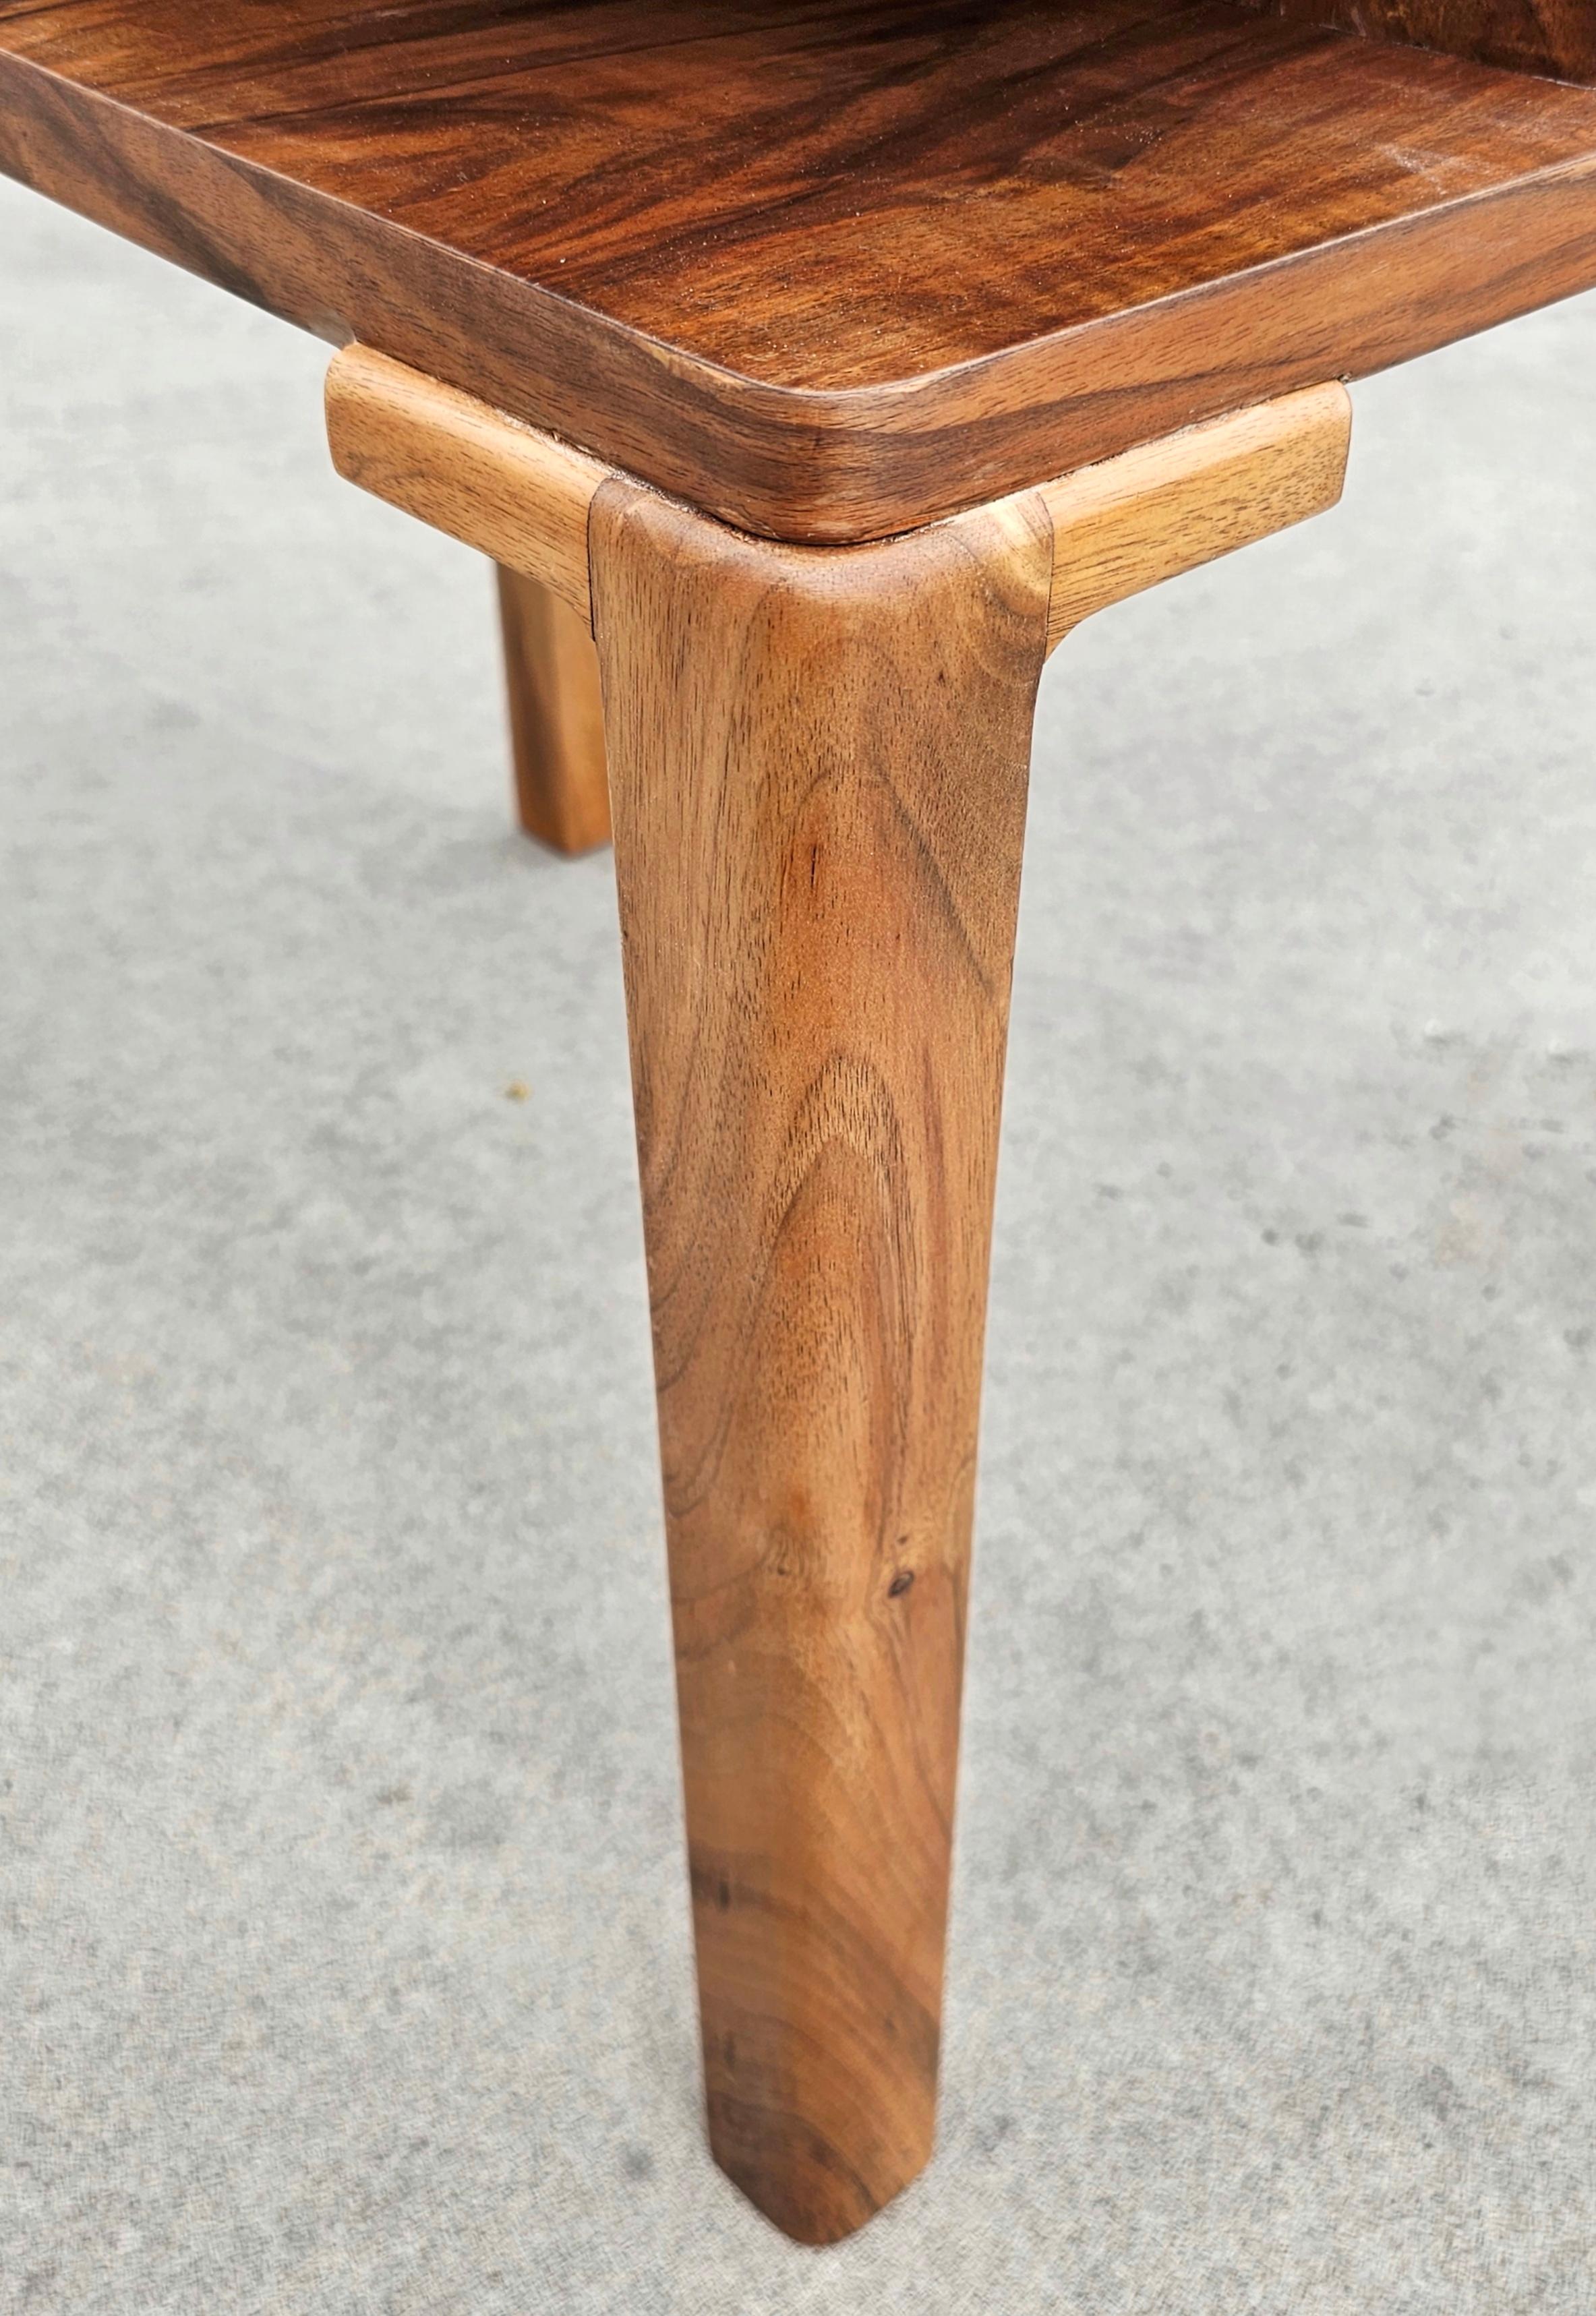 Rectangular Two Tiered Art Deco Walnut Side Table, Austria 1930s For Sale 5